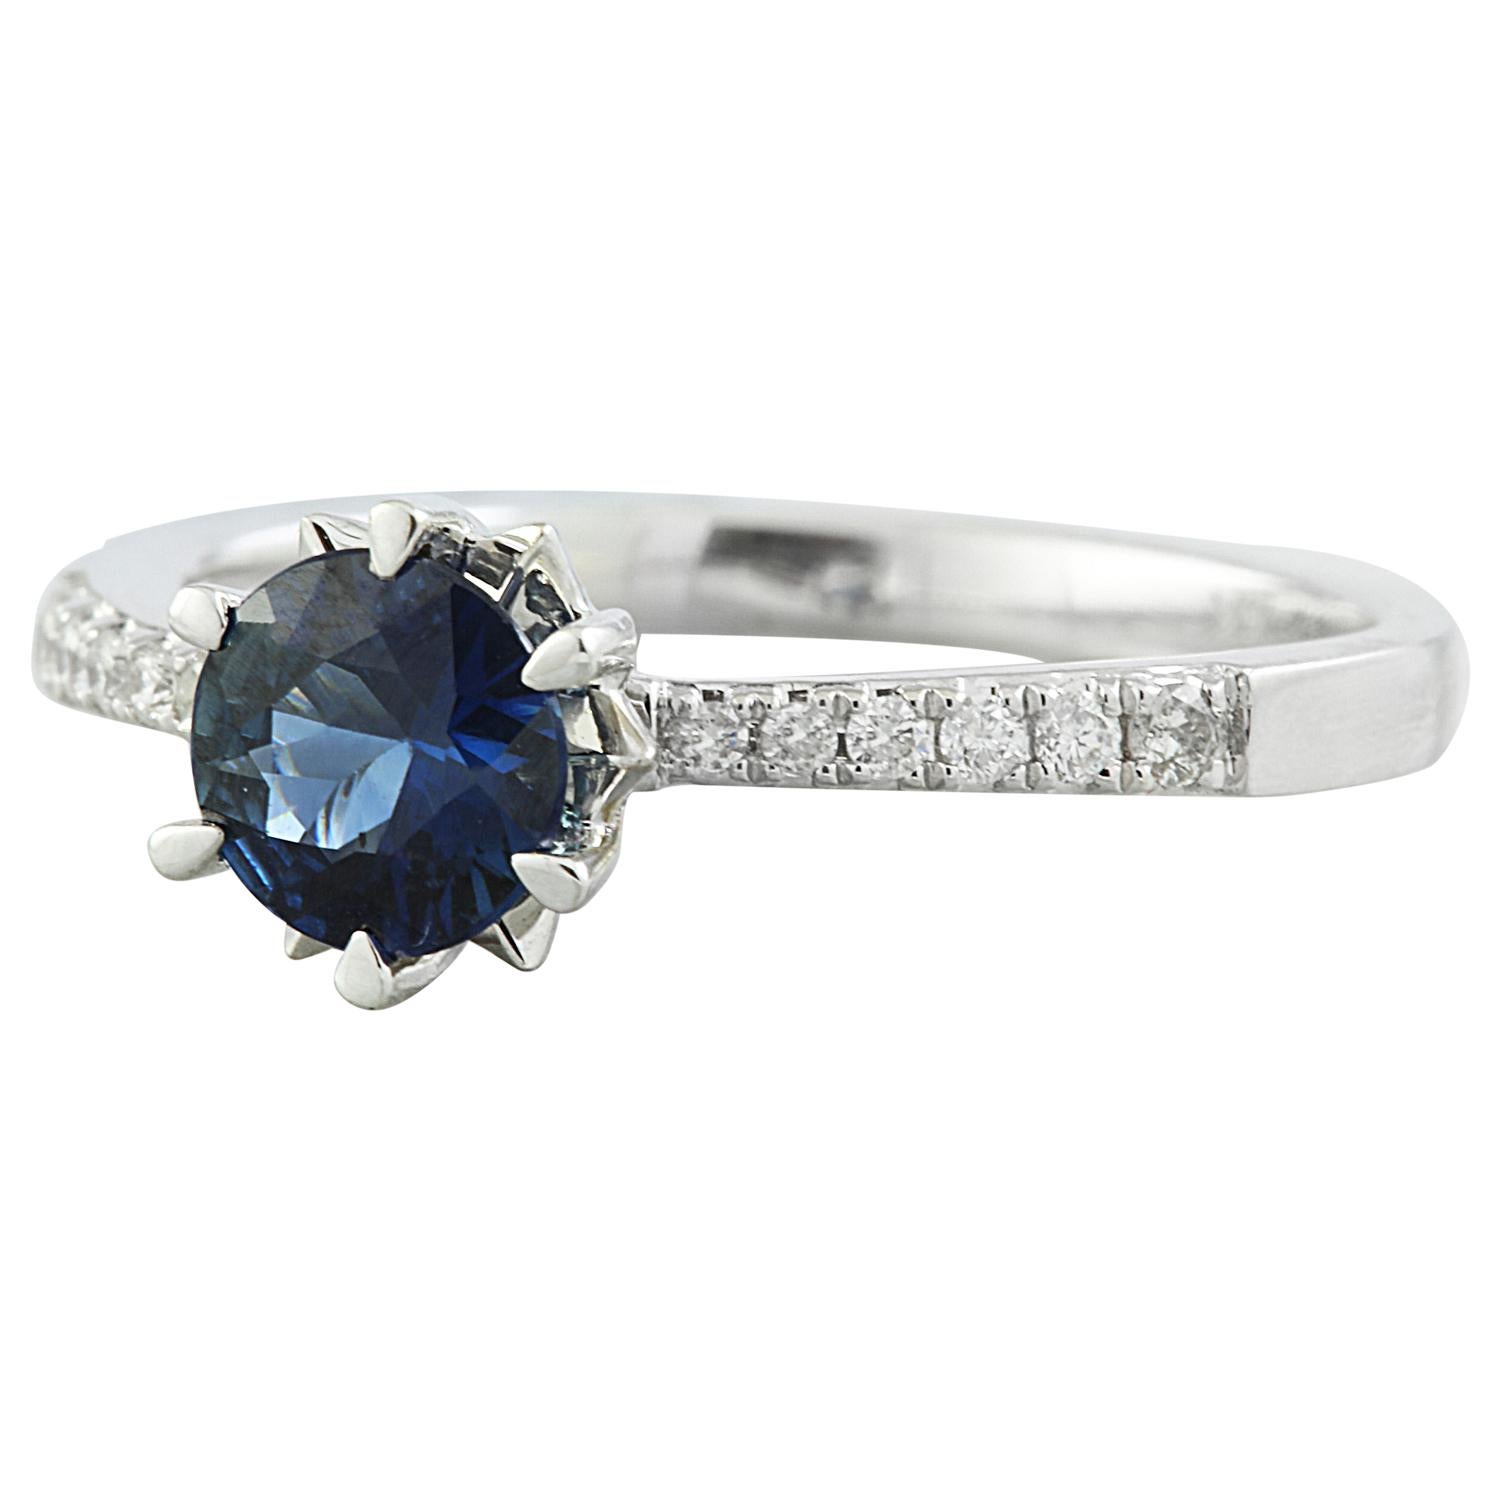 Introducing our exquisite 1.18 Carat Natural Sapphire 14K Solid White Gold Diamond Ring.
This ring boasts 14K Solid White Gold and weighs a total of 2.2 grams.
The focal point of this stunning piece is a natural sapphire weighing 1.05 carats,